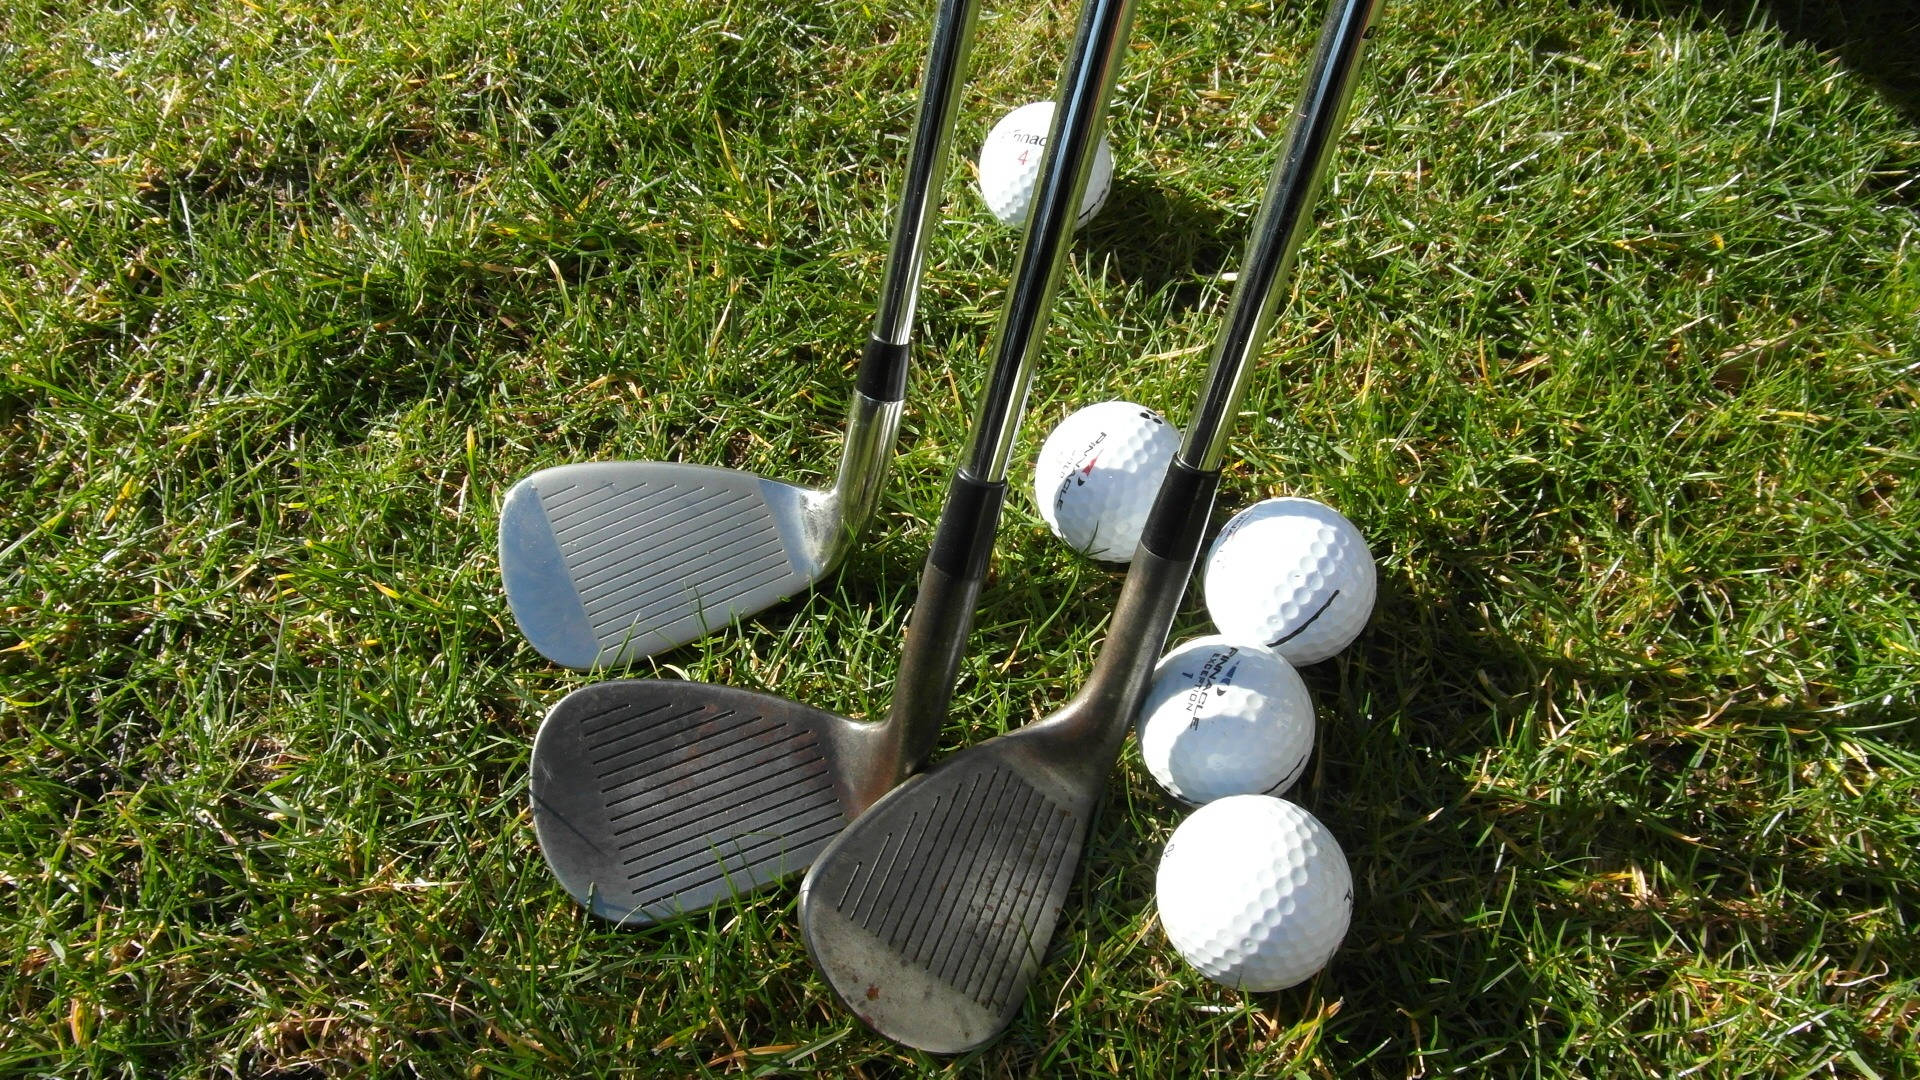 Golf Club Heads And Balls On Golf Course